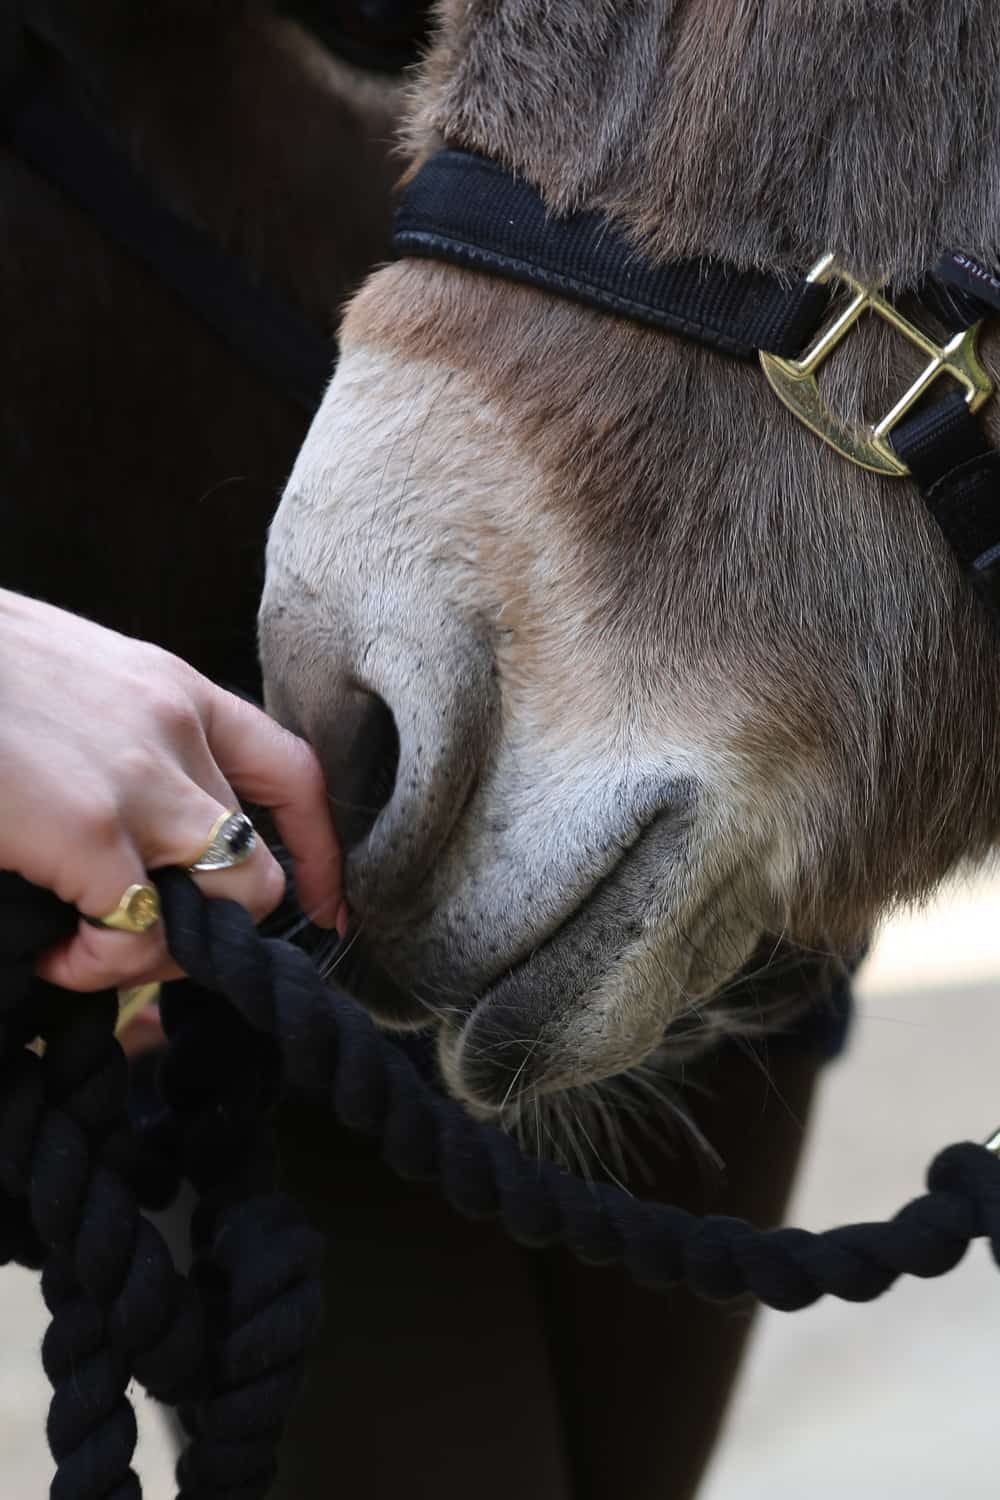 Take advantage of the horse’s strong sense of smell